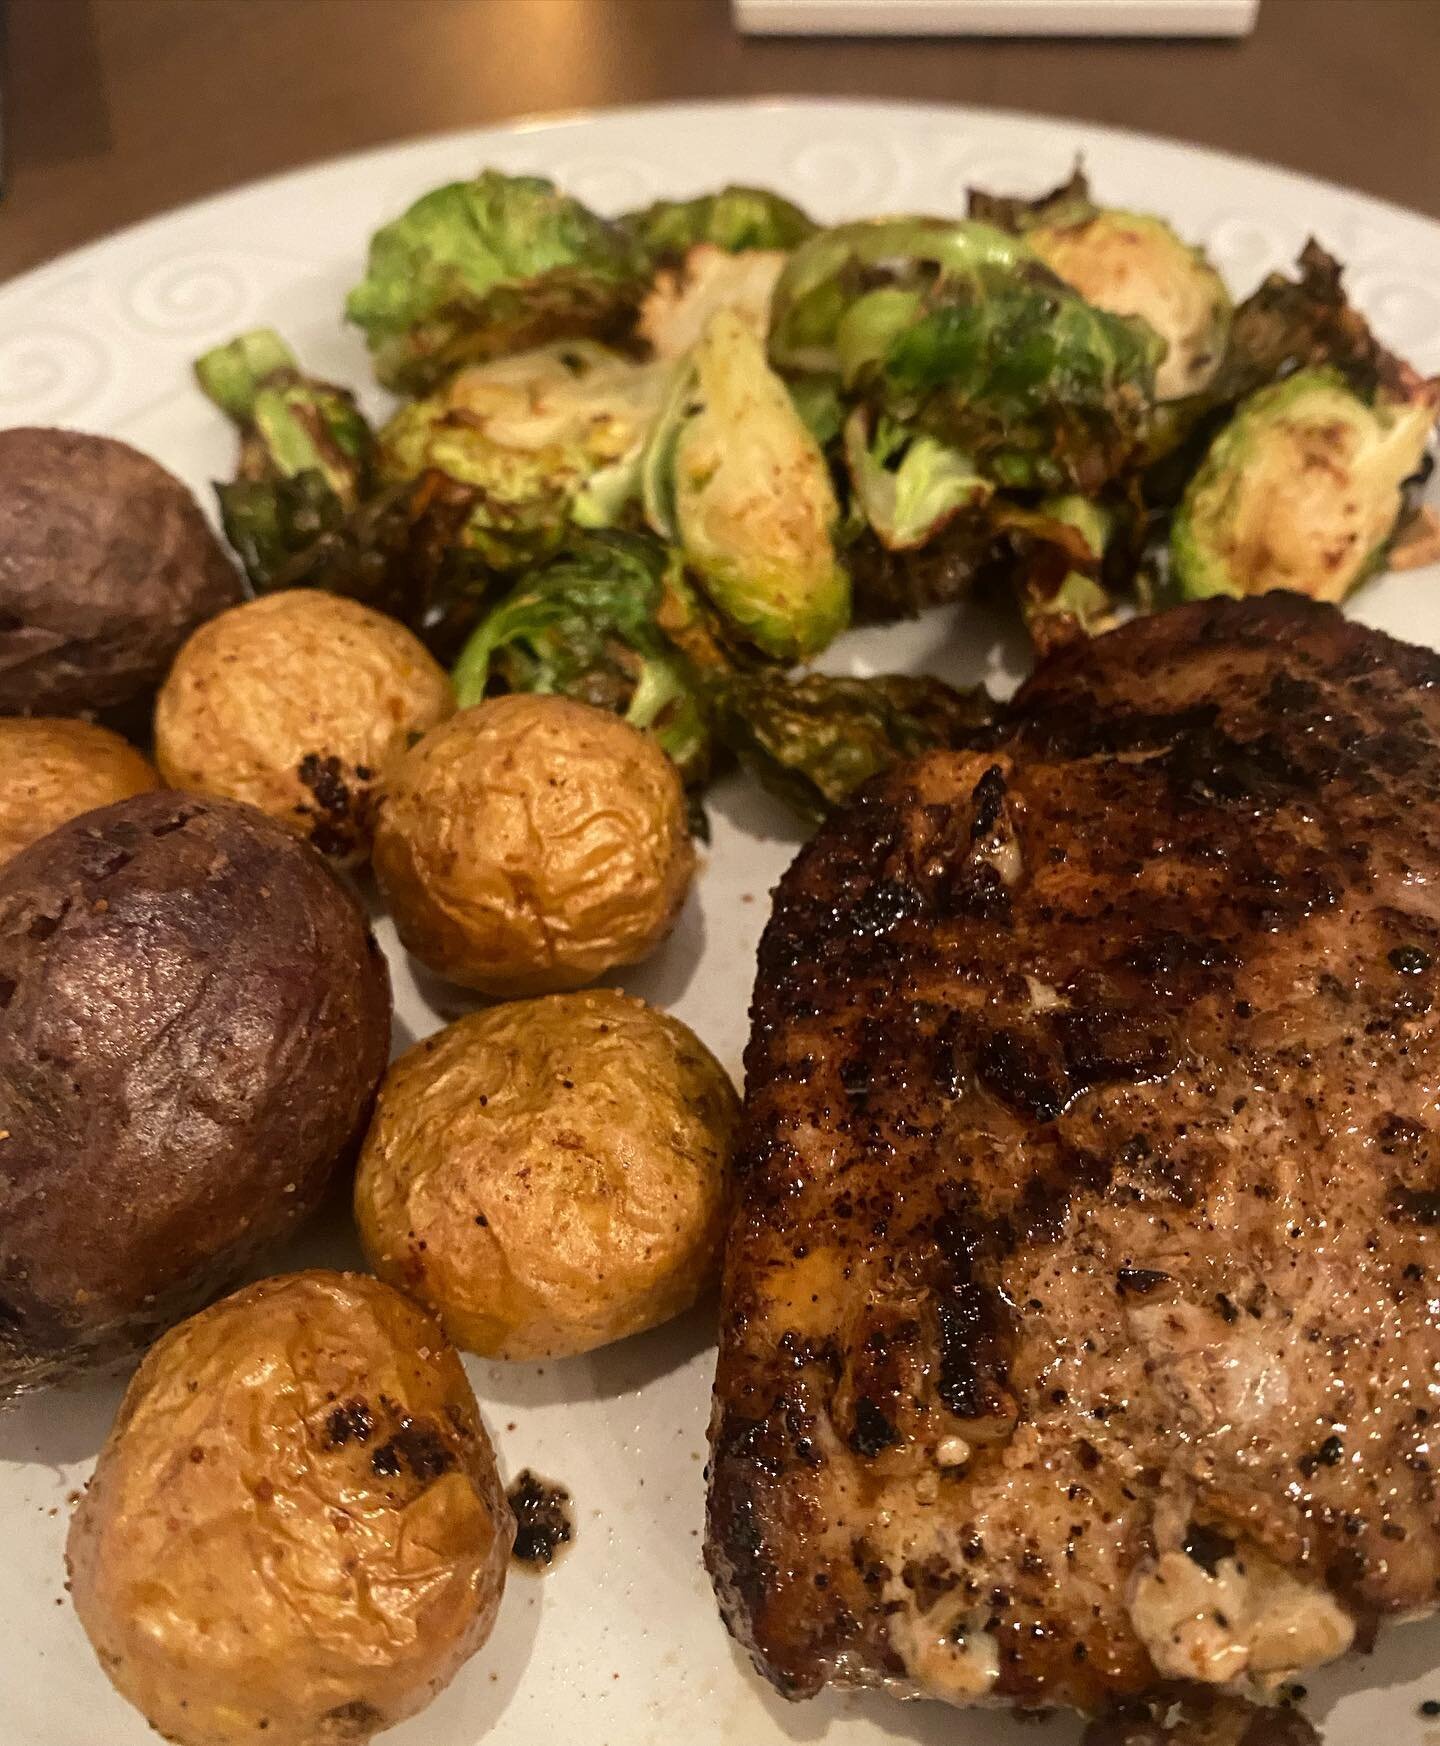 With school starting back up, everyone could use a quick and easy dinner idea! 

Re-create this plate by
1. Tossing some Brussels sprouts &amp; mini potatoes in olive oil &amp; Opa Salt then air fry for 10-15 minutes at 375F (can also be cooked on a 